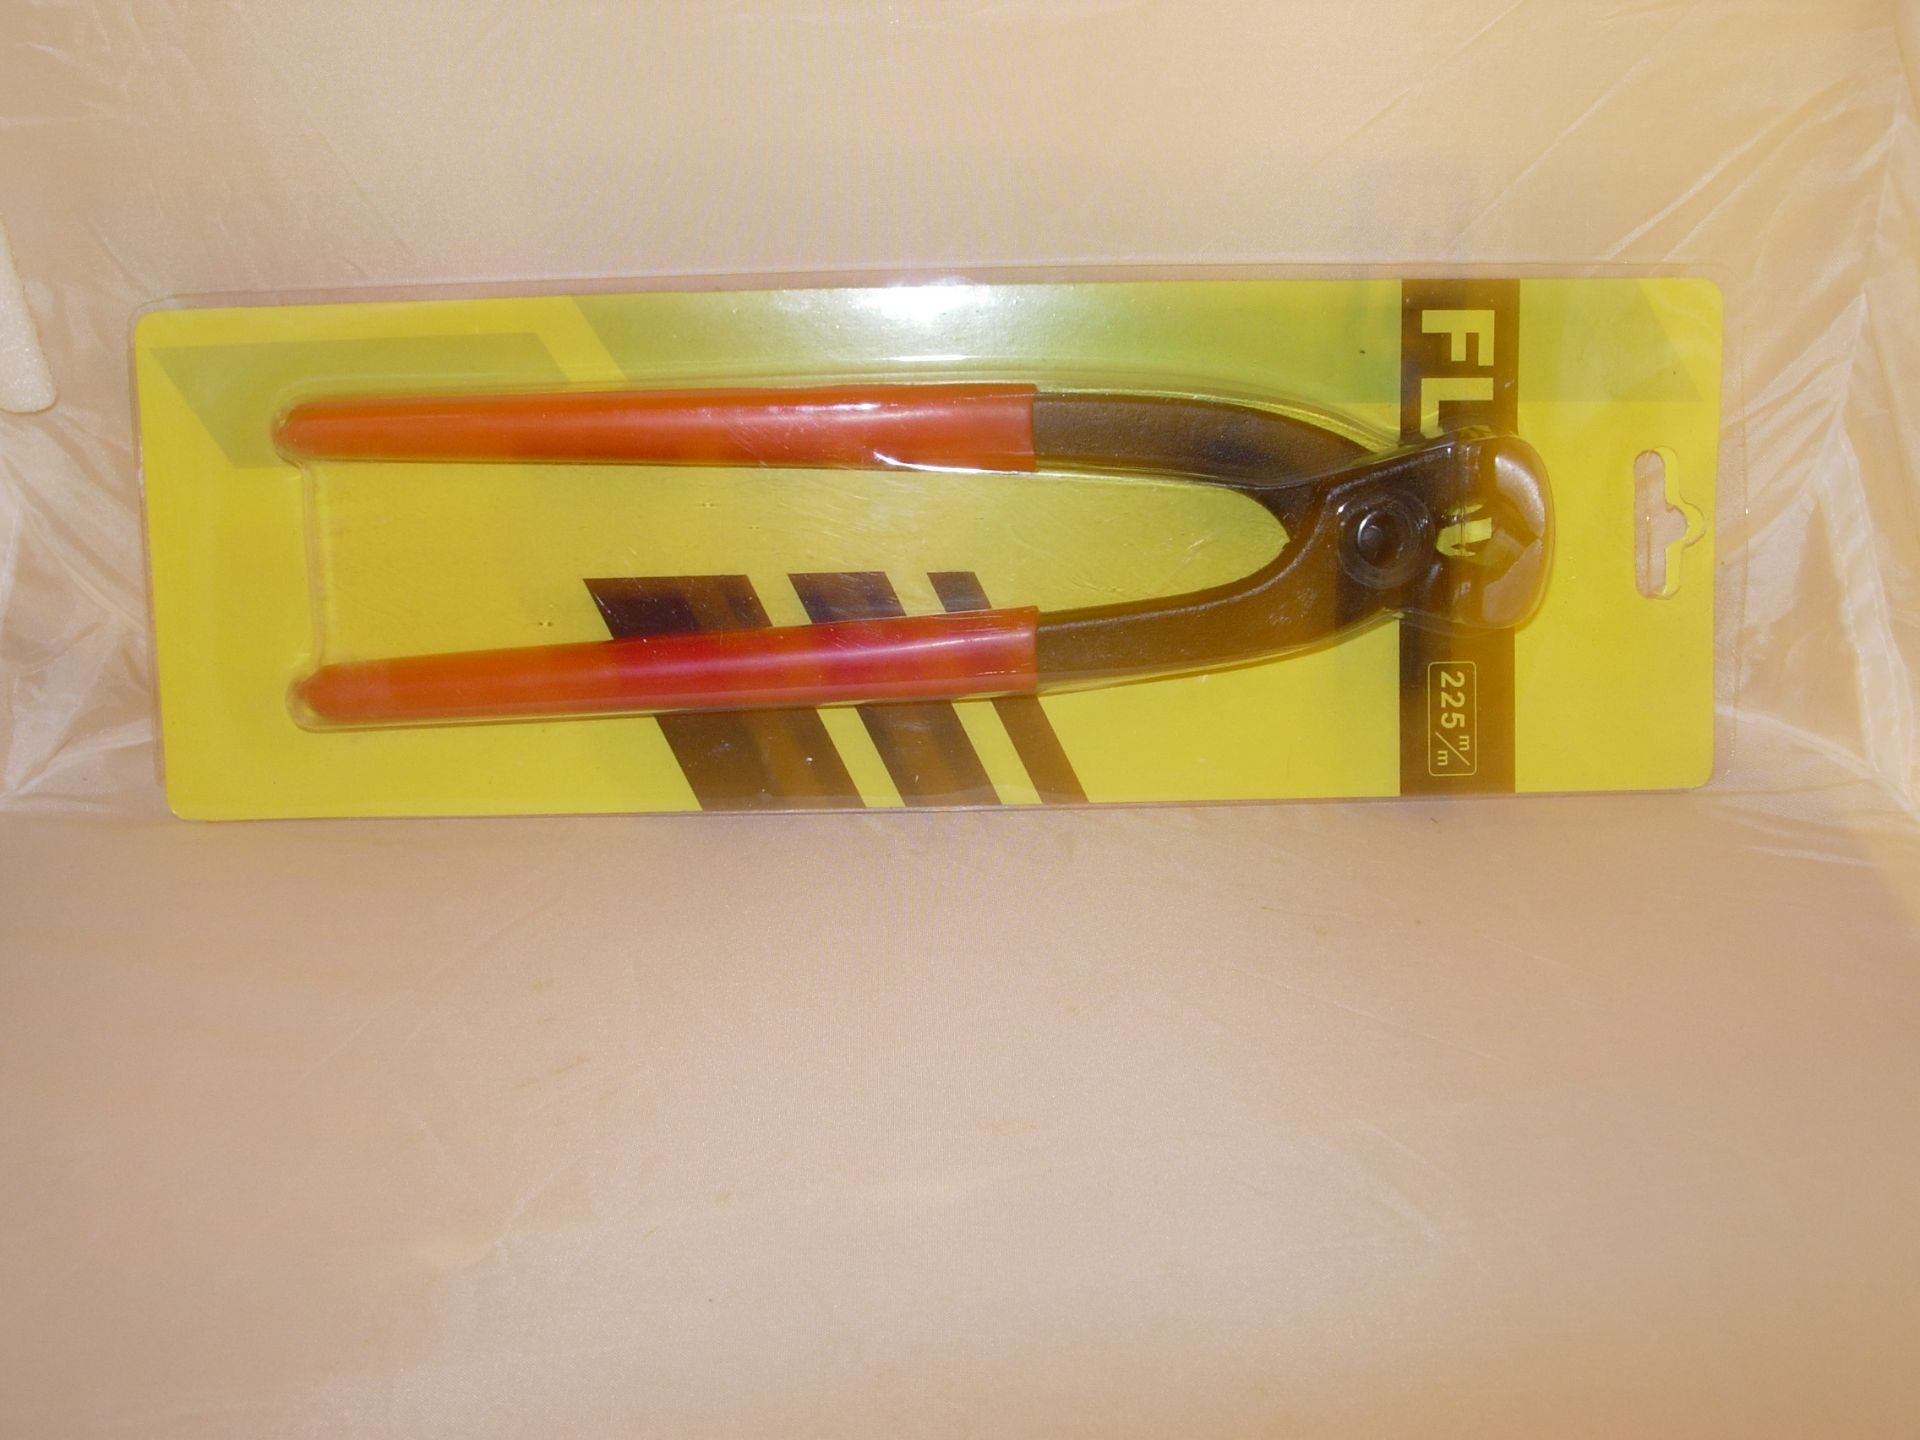 2 Bx Of 5 End Cutting Pliers 225Mm Long - Image 3 of 3